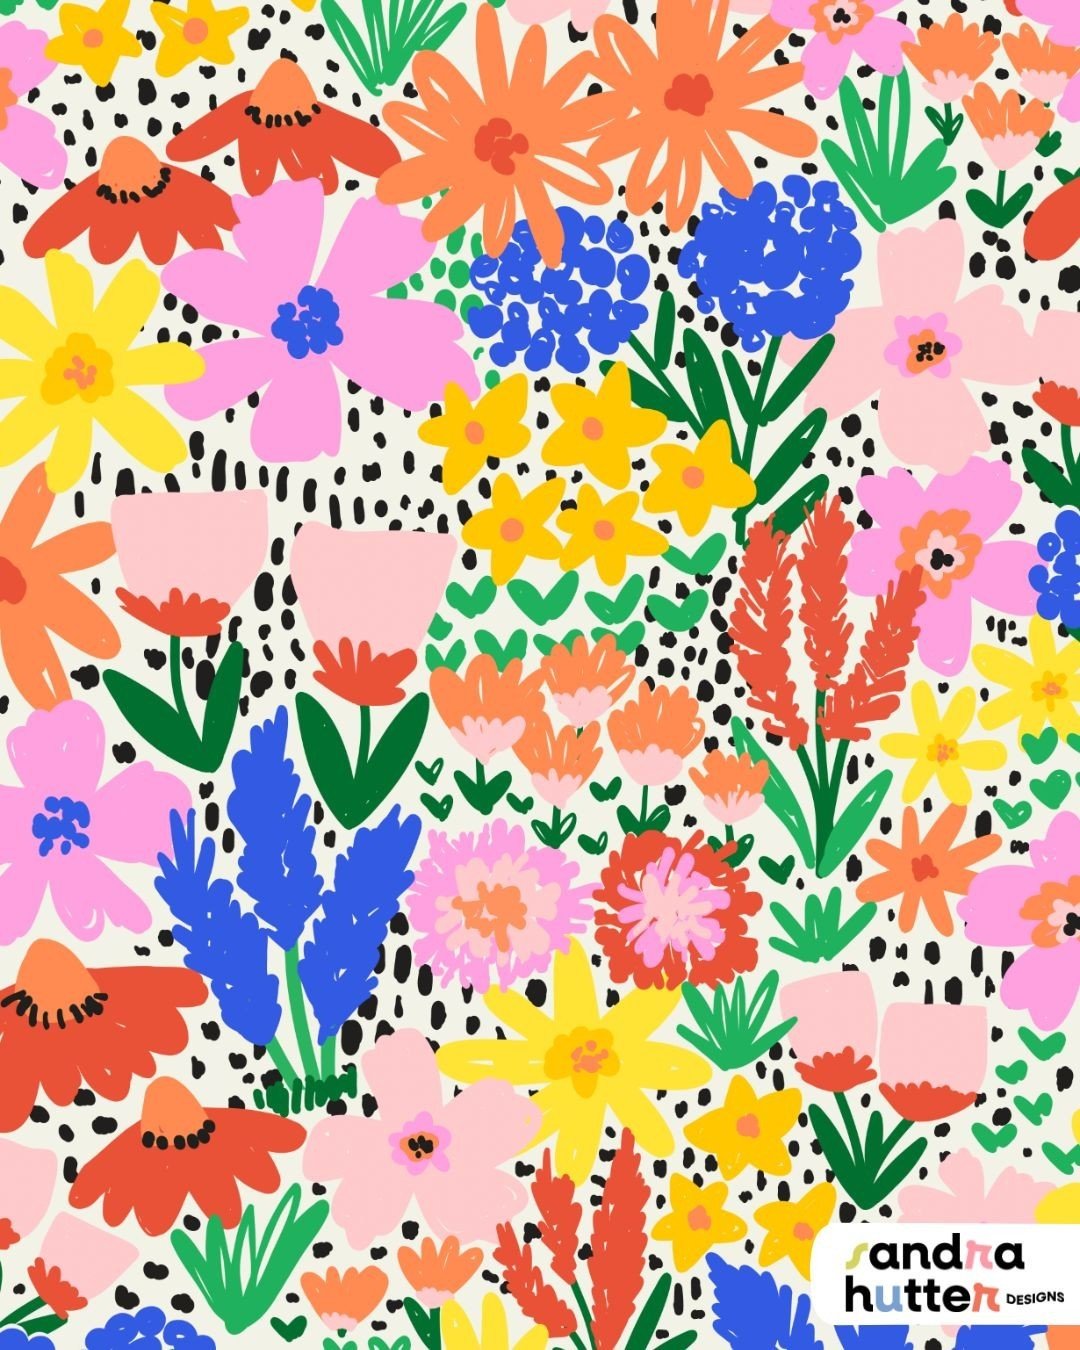 🌸🎨 The goal for the @Spoonflower Party Wall challenge was to create a feel-good design that makes you want to get up and celebrate when you walk into a wallpapered room. In my opinion, there's no better way to evoke that feeling than with colorful 